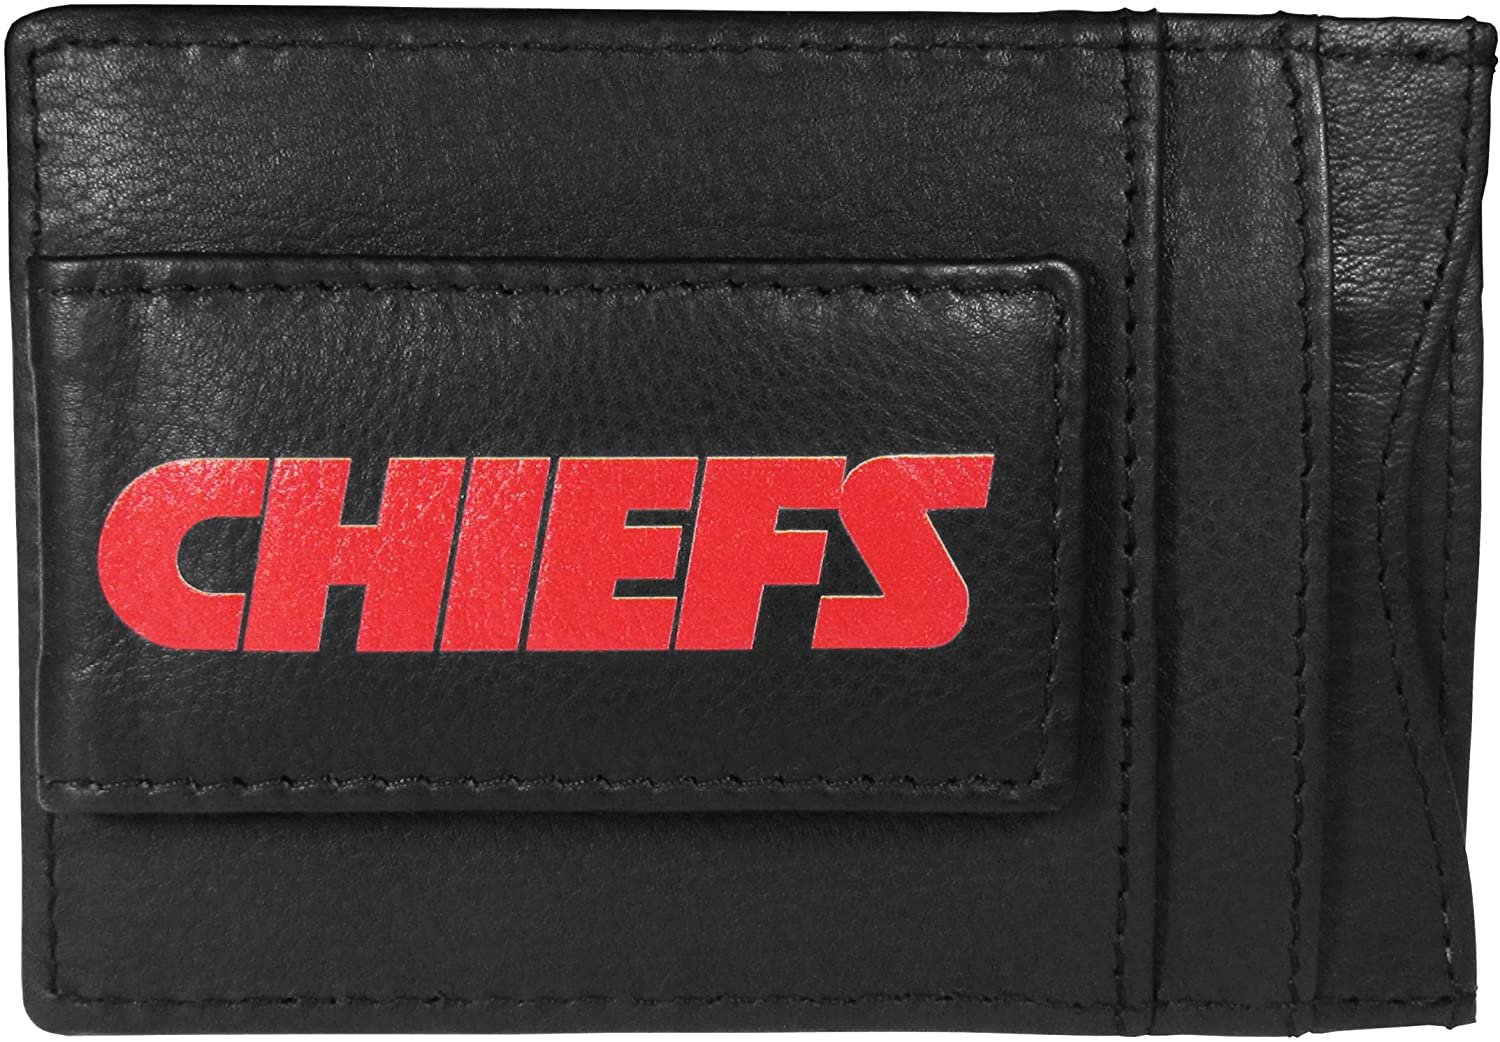 Kansas City Chiefs Black Leather Wallet, Front Pocket Magnetic Money Clip, Printed Logo